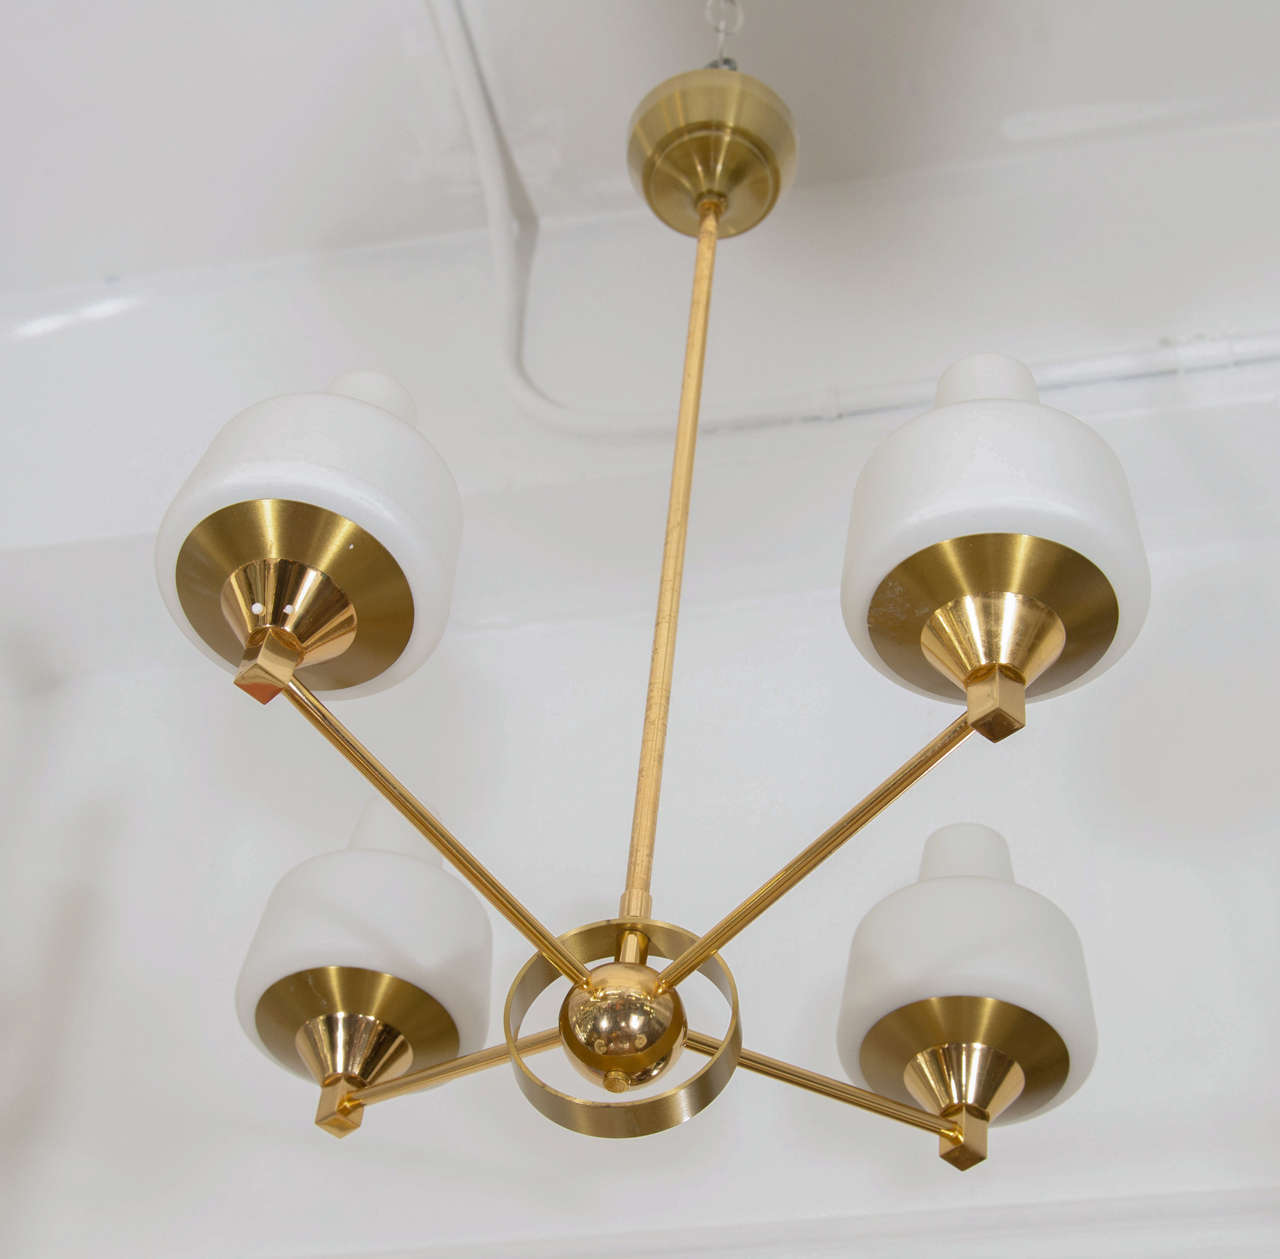 A midcentury brass framed, four-arm French pendant or chandelier with frosted glass shades.

Good vintage condition with age appropriate wear.

Reduced from: 2800.